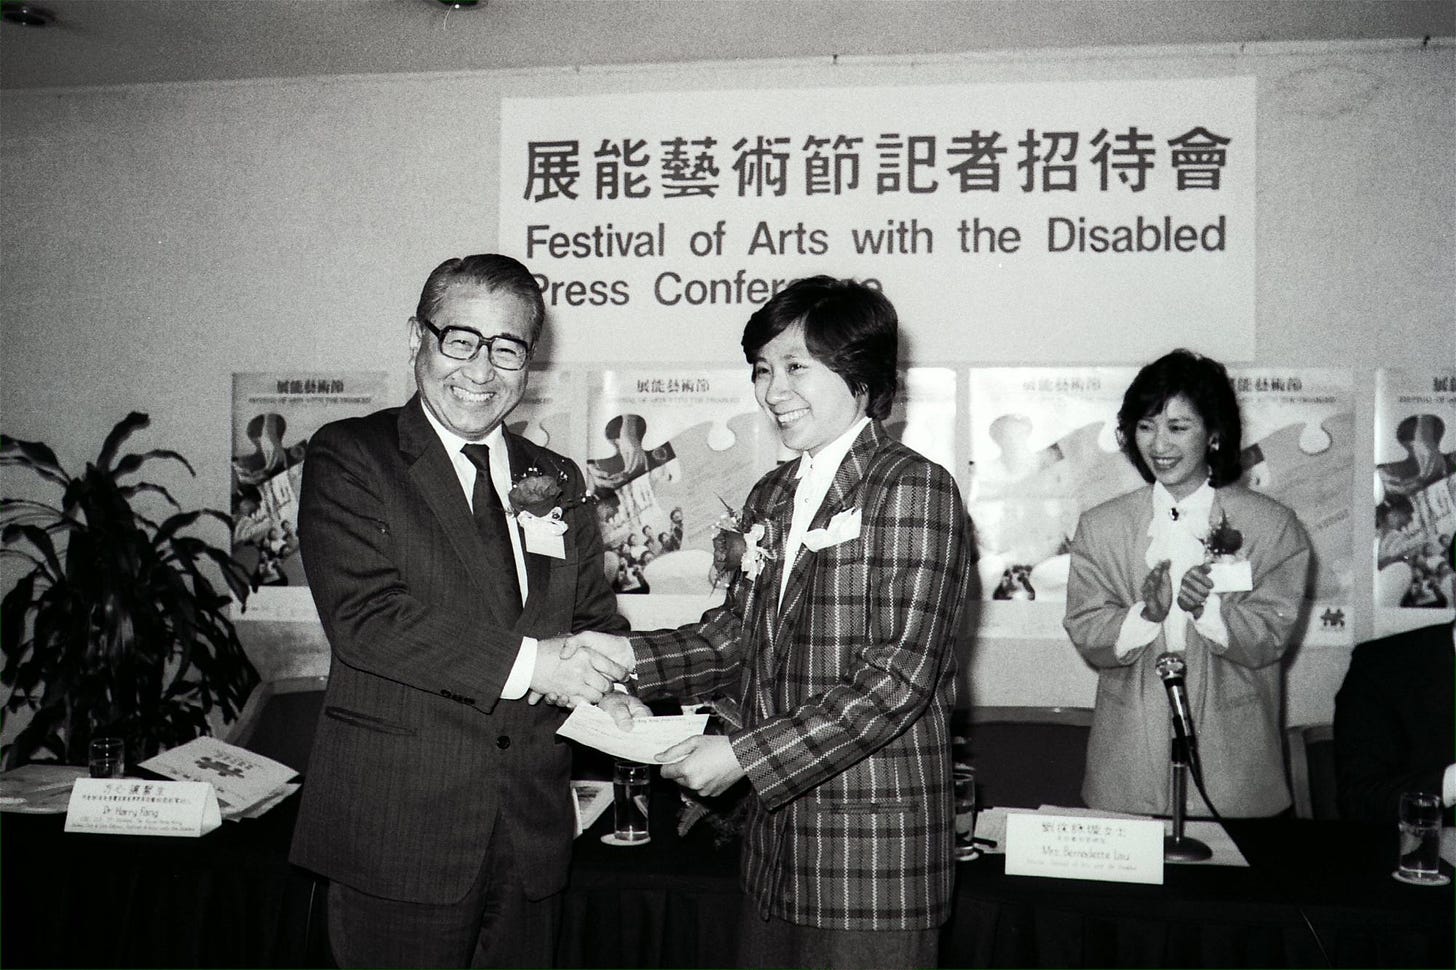 Dr Harry Fang Sin-yang (left), chairman of the Hong Kong Joint Council for the Physically and Mentally Handicapped, presents a cheque to Dr Henrietta Ip, chairwoman of the Festival of Arts with the Disabled Organising Committee, in 1986.